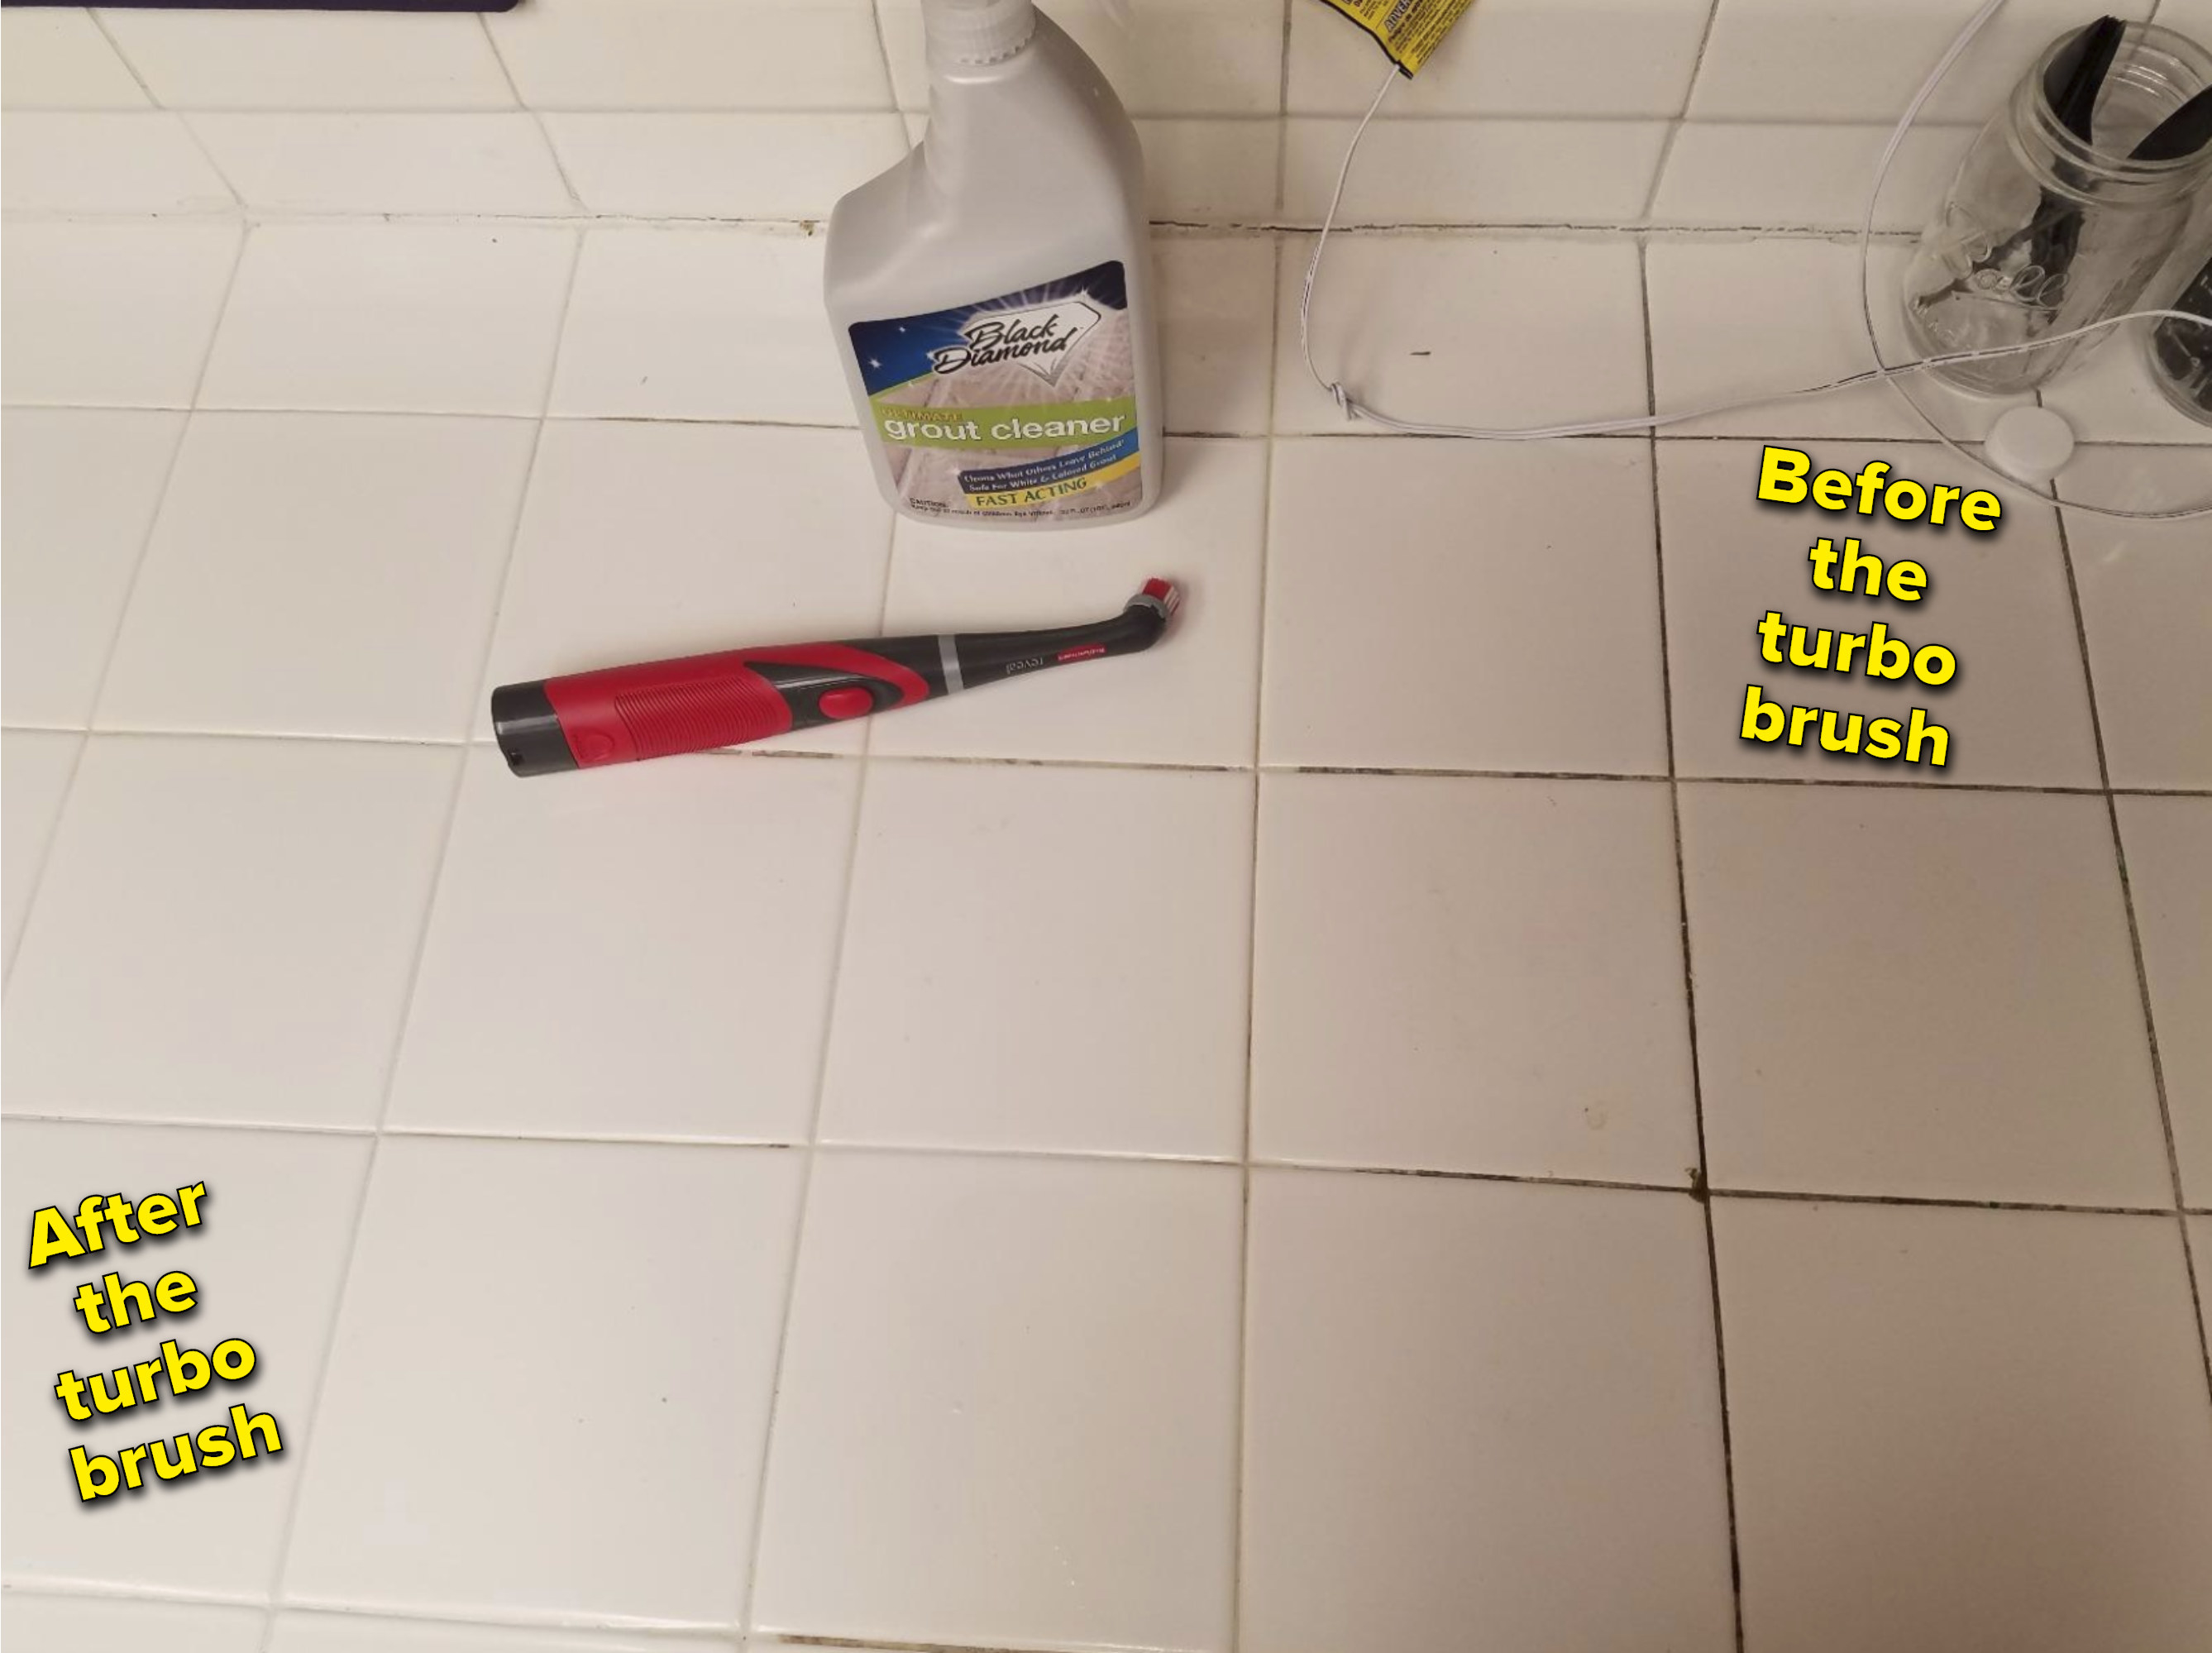 the brush laying on the floor. one side of the tiled floor is completely white after using the brush. The right side of the floor still has black grime in the crevices of the tile.